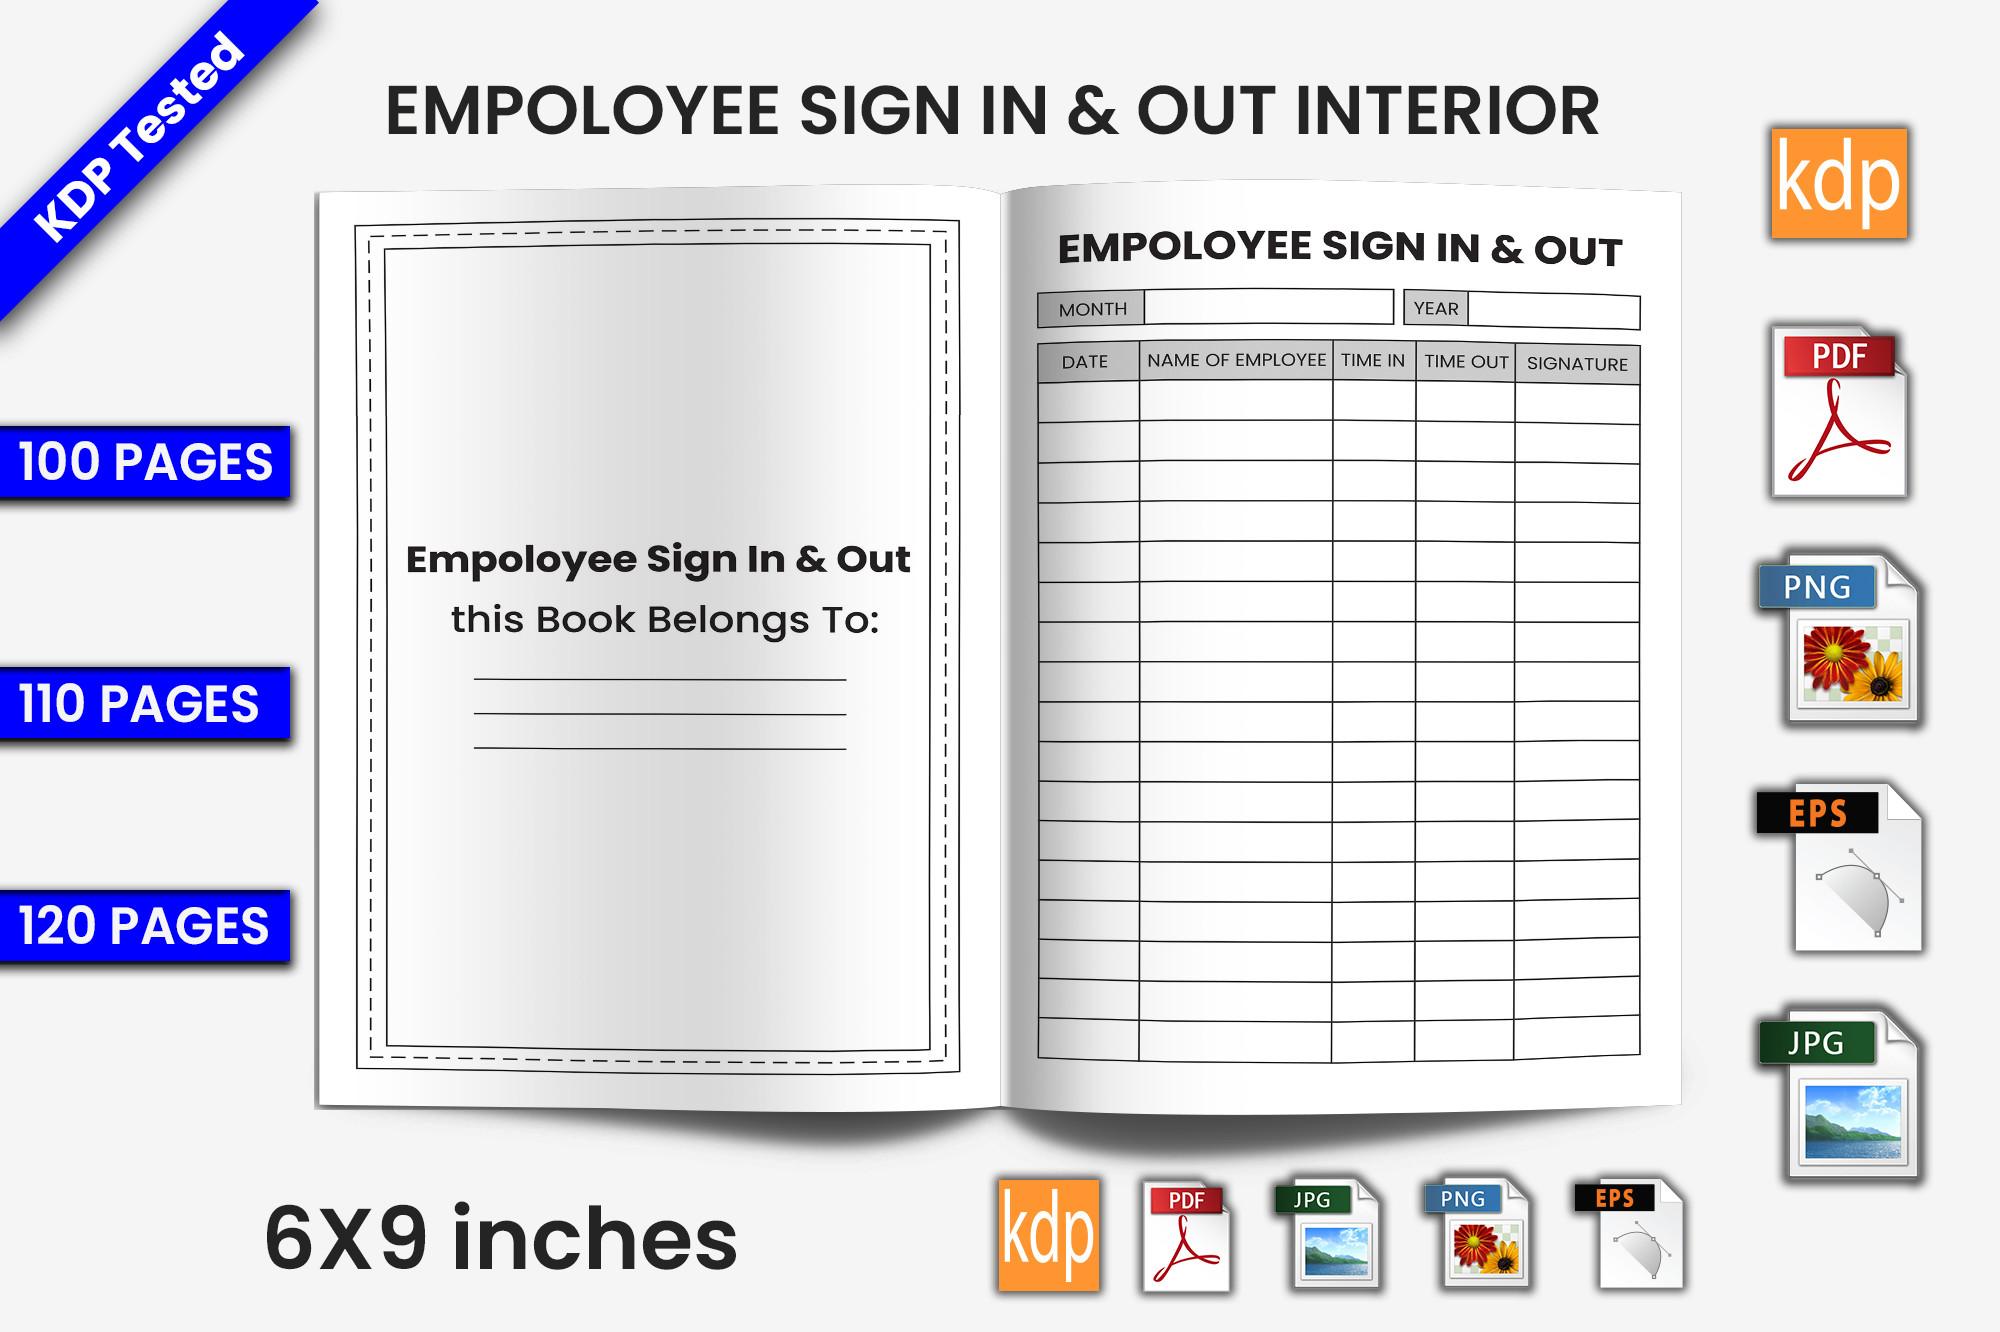 Empoloyee Sign in & out Log Book | KDP